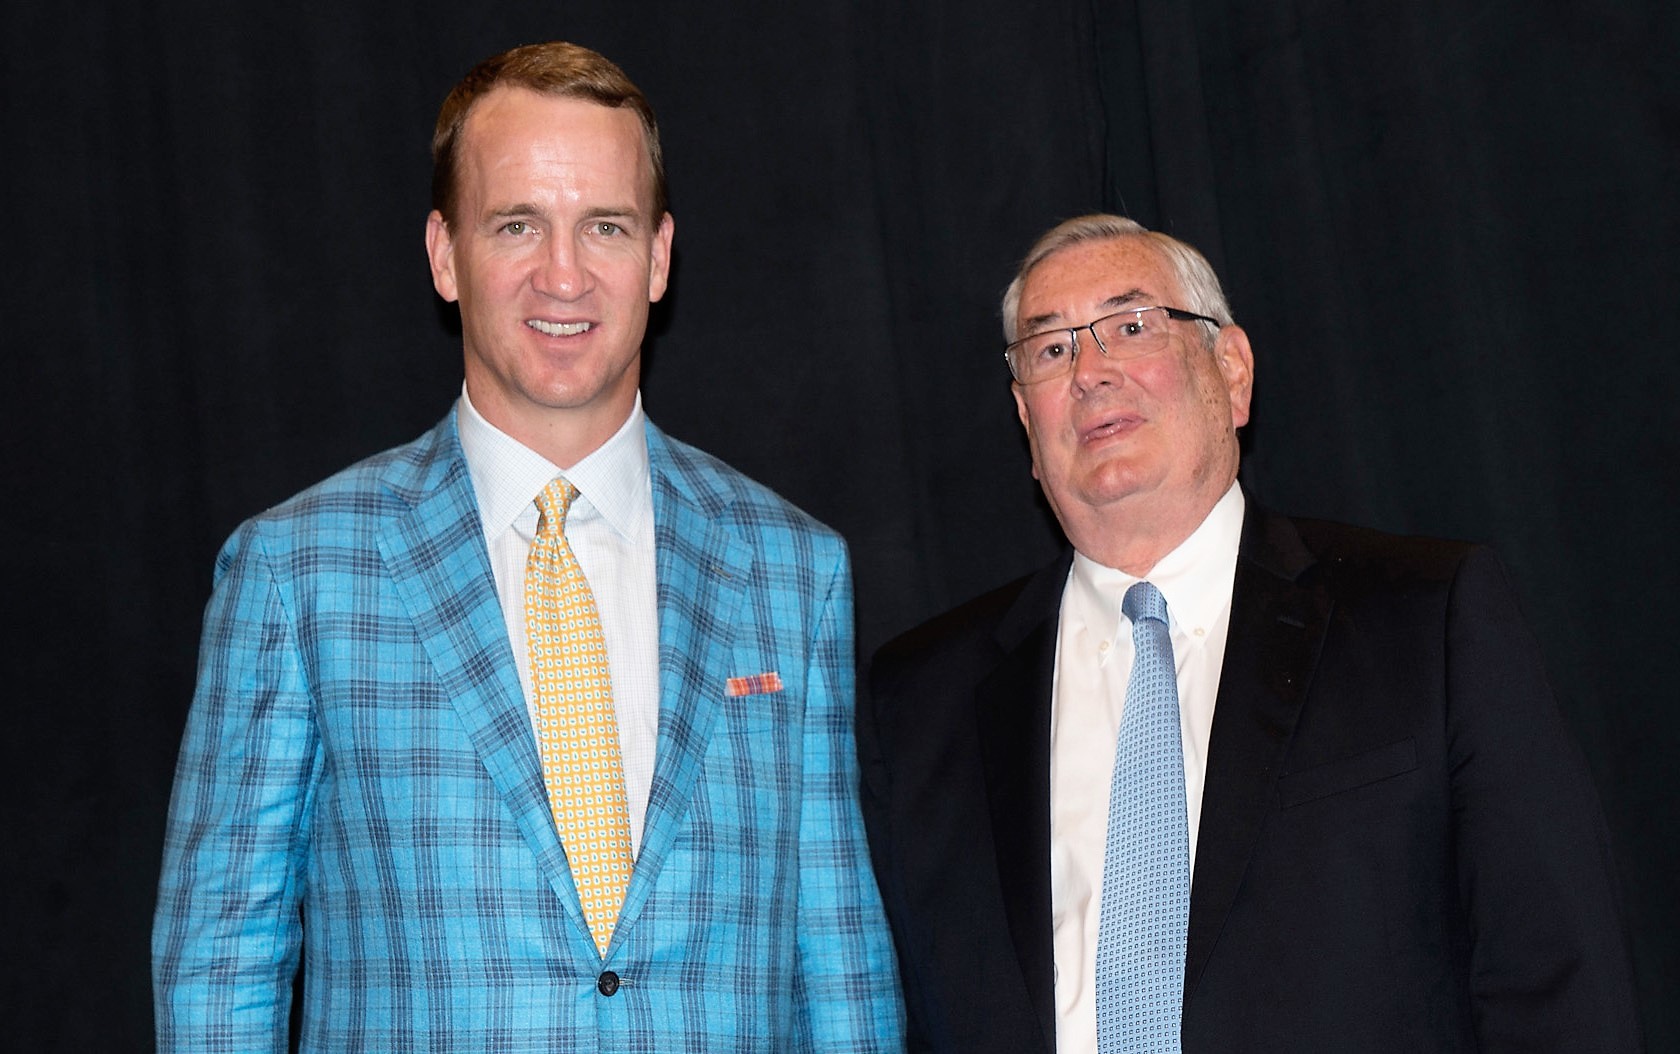 Peyton Manning, who made a special appearance, joins Lee Whittaker (right), president of MDM Healthcare, at the Premier Breakthroughs Conference Awards Ceremony.